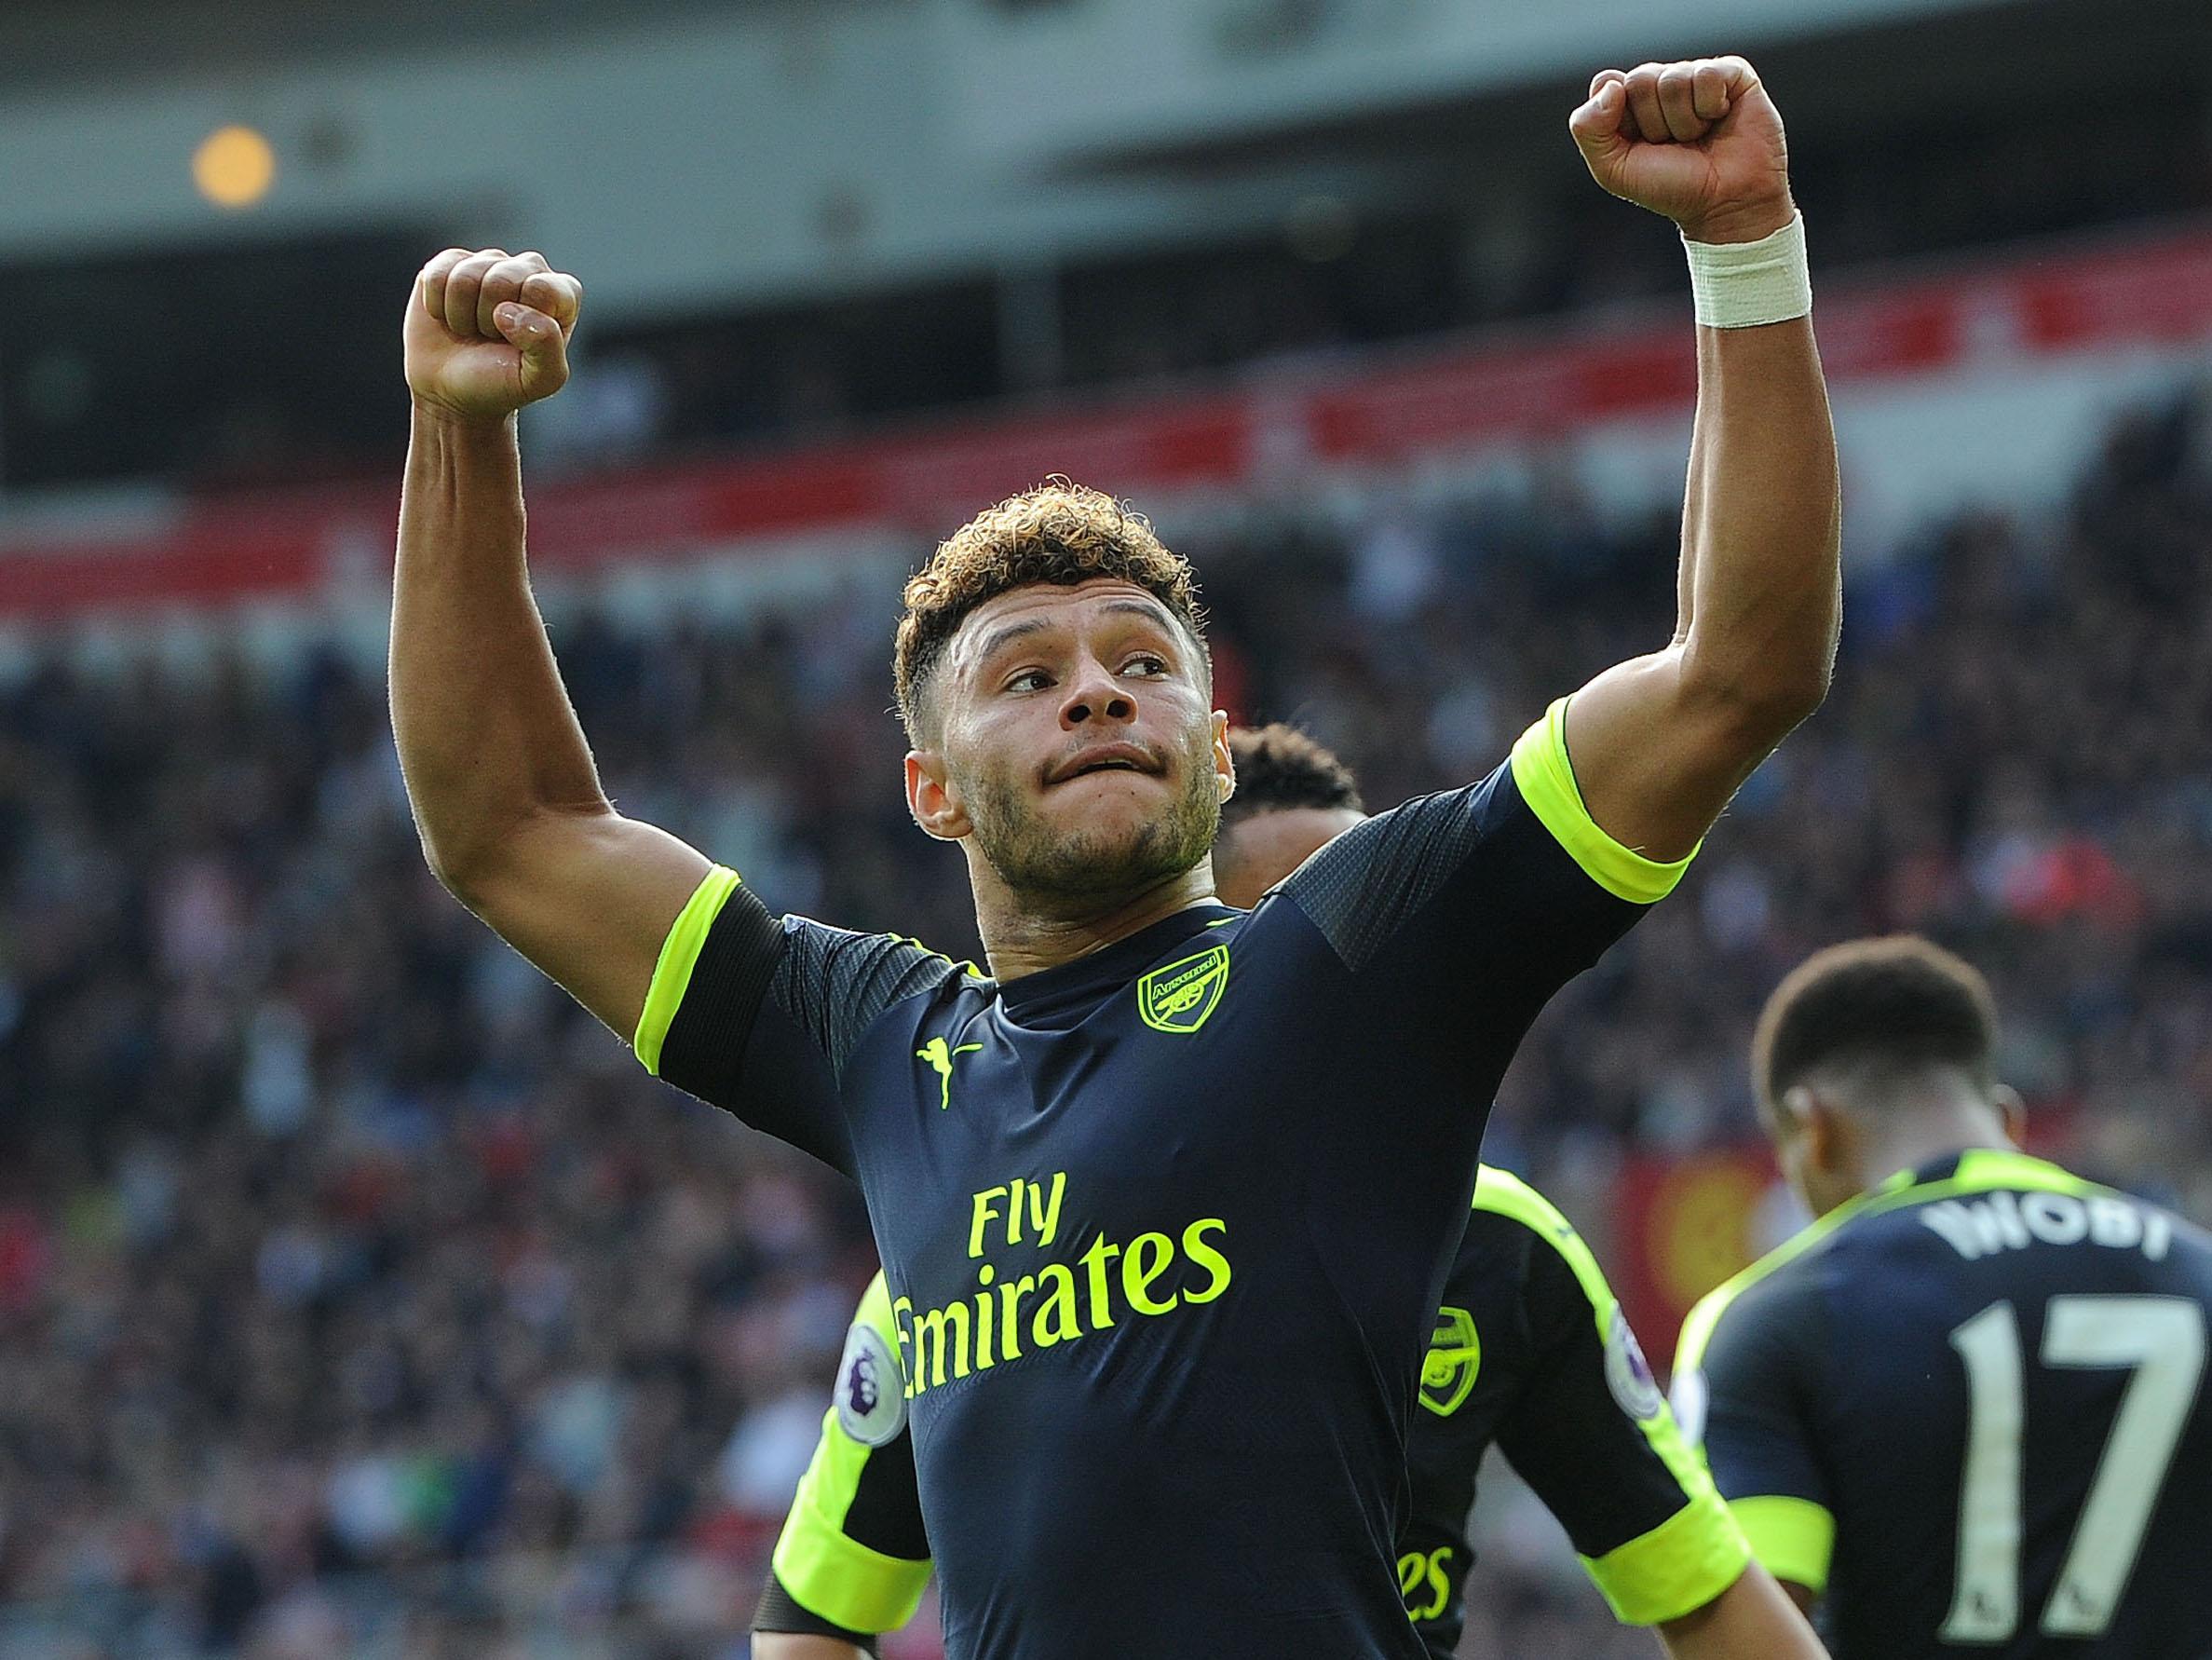 Oxlade-Chamberlain joined Arsenal from Southampton in 2011 and has won 24 England caps since his 2012 international debut (Getty Images)